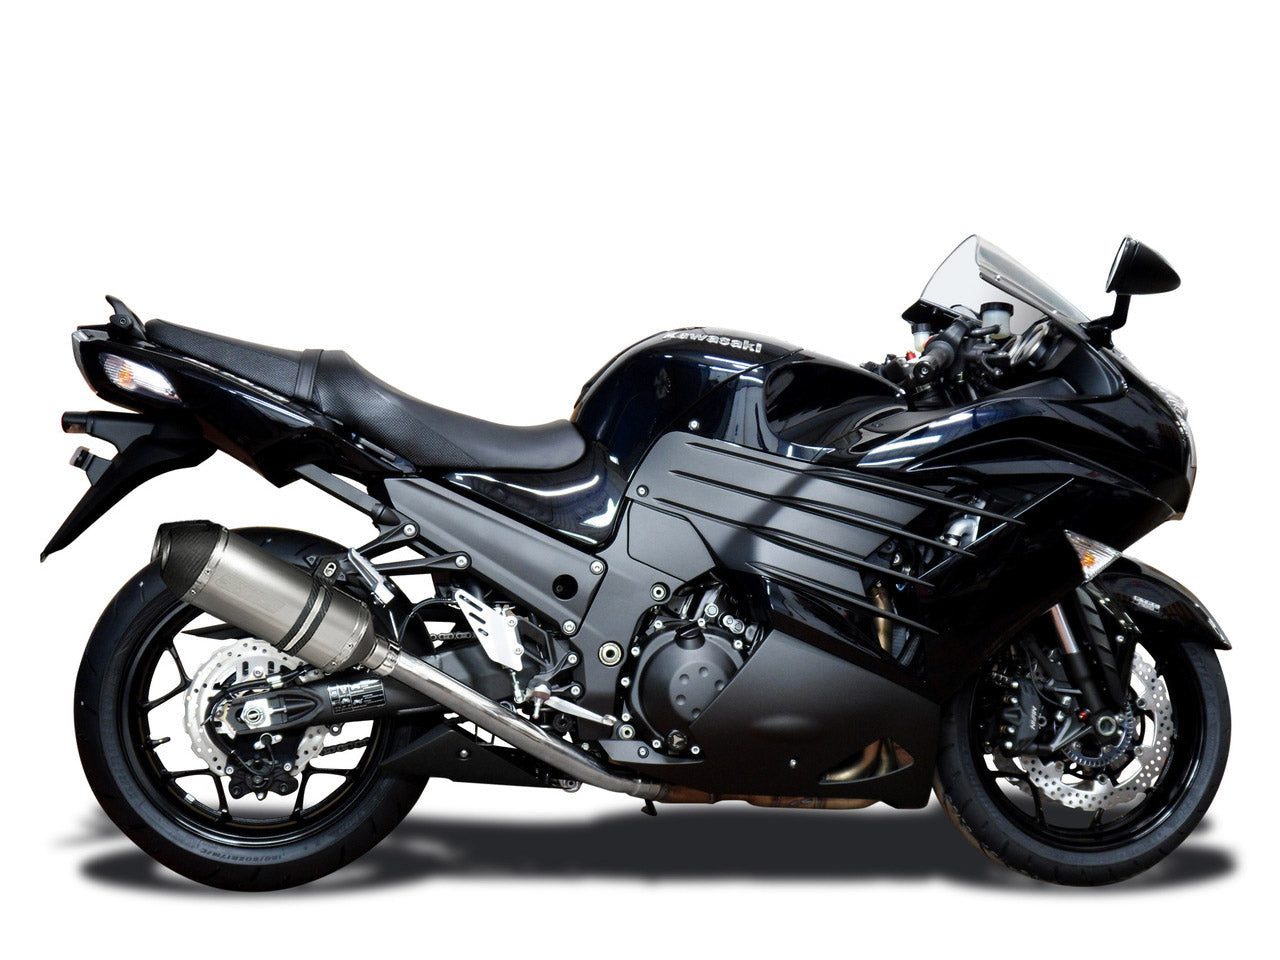 DELKEVIC Kawasaki Ninja ZX-14R Full Exhaust System with 10" Titanium X-Oval Silencers